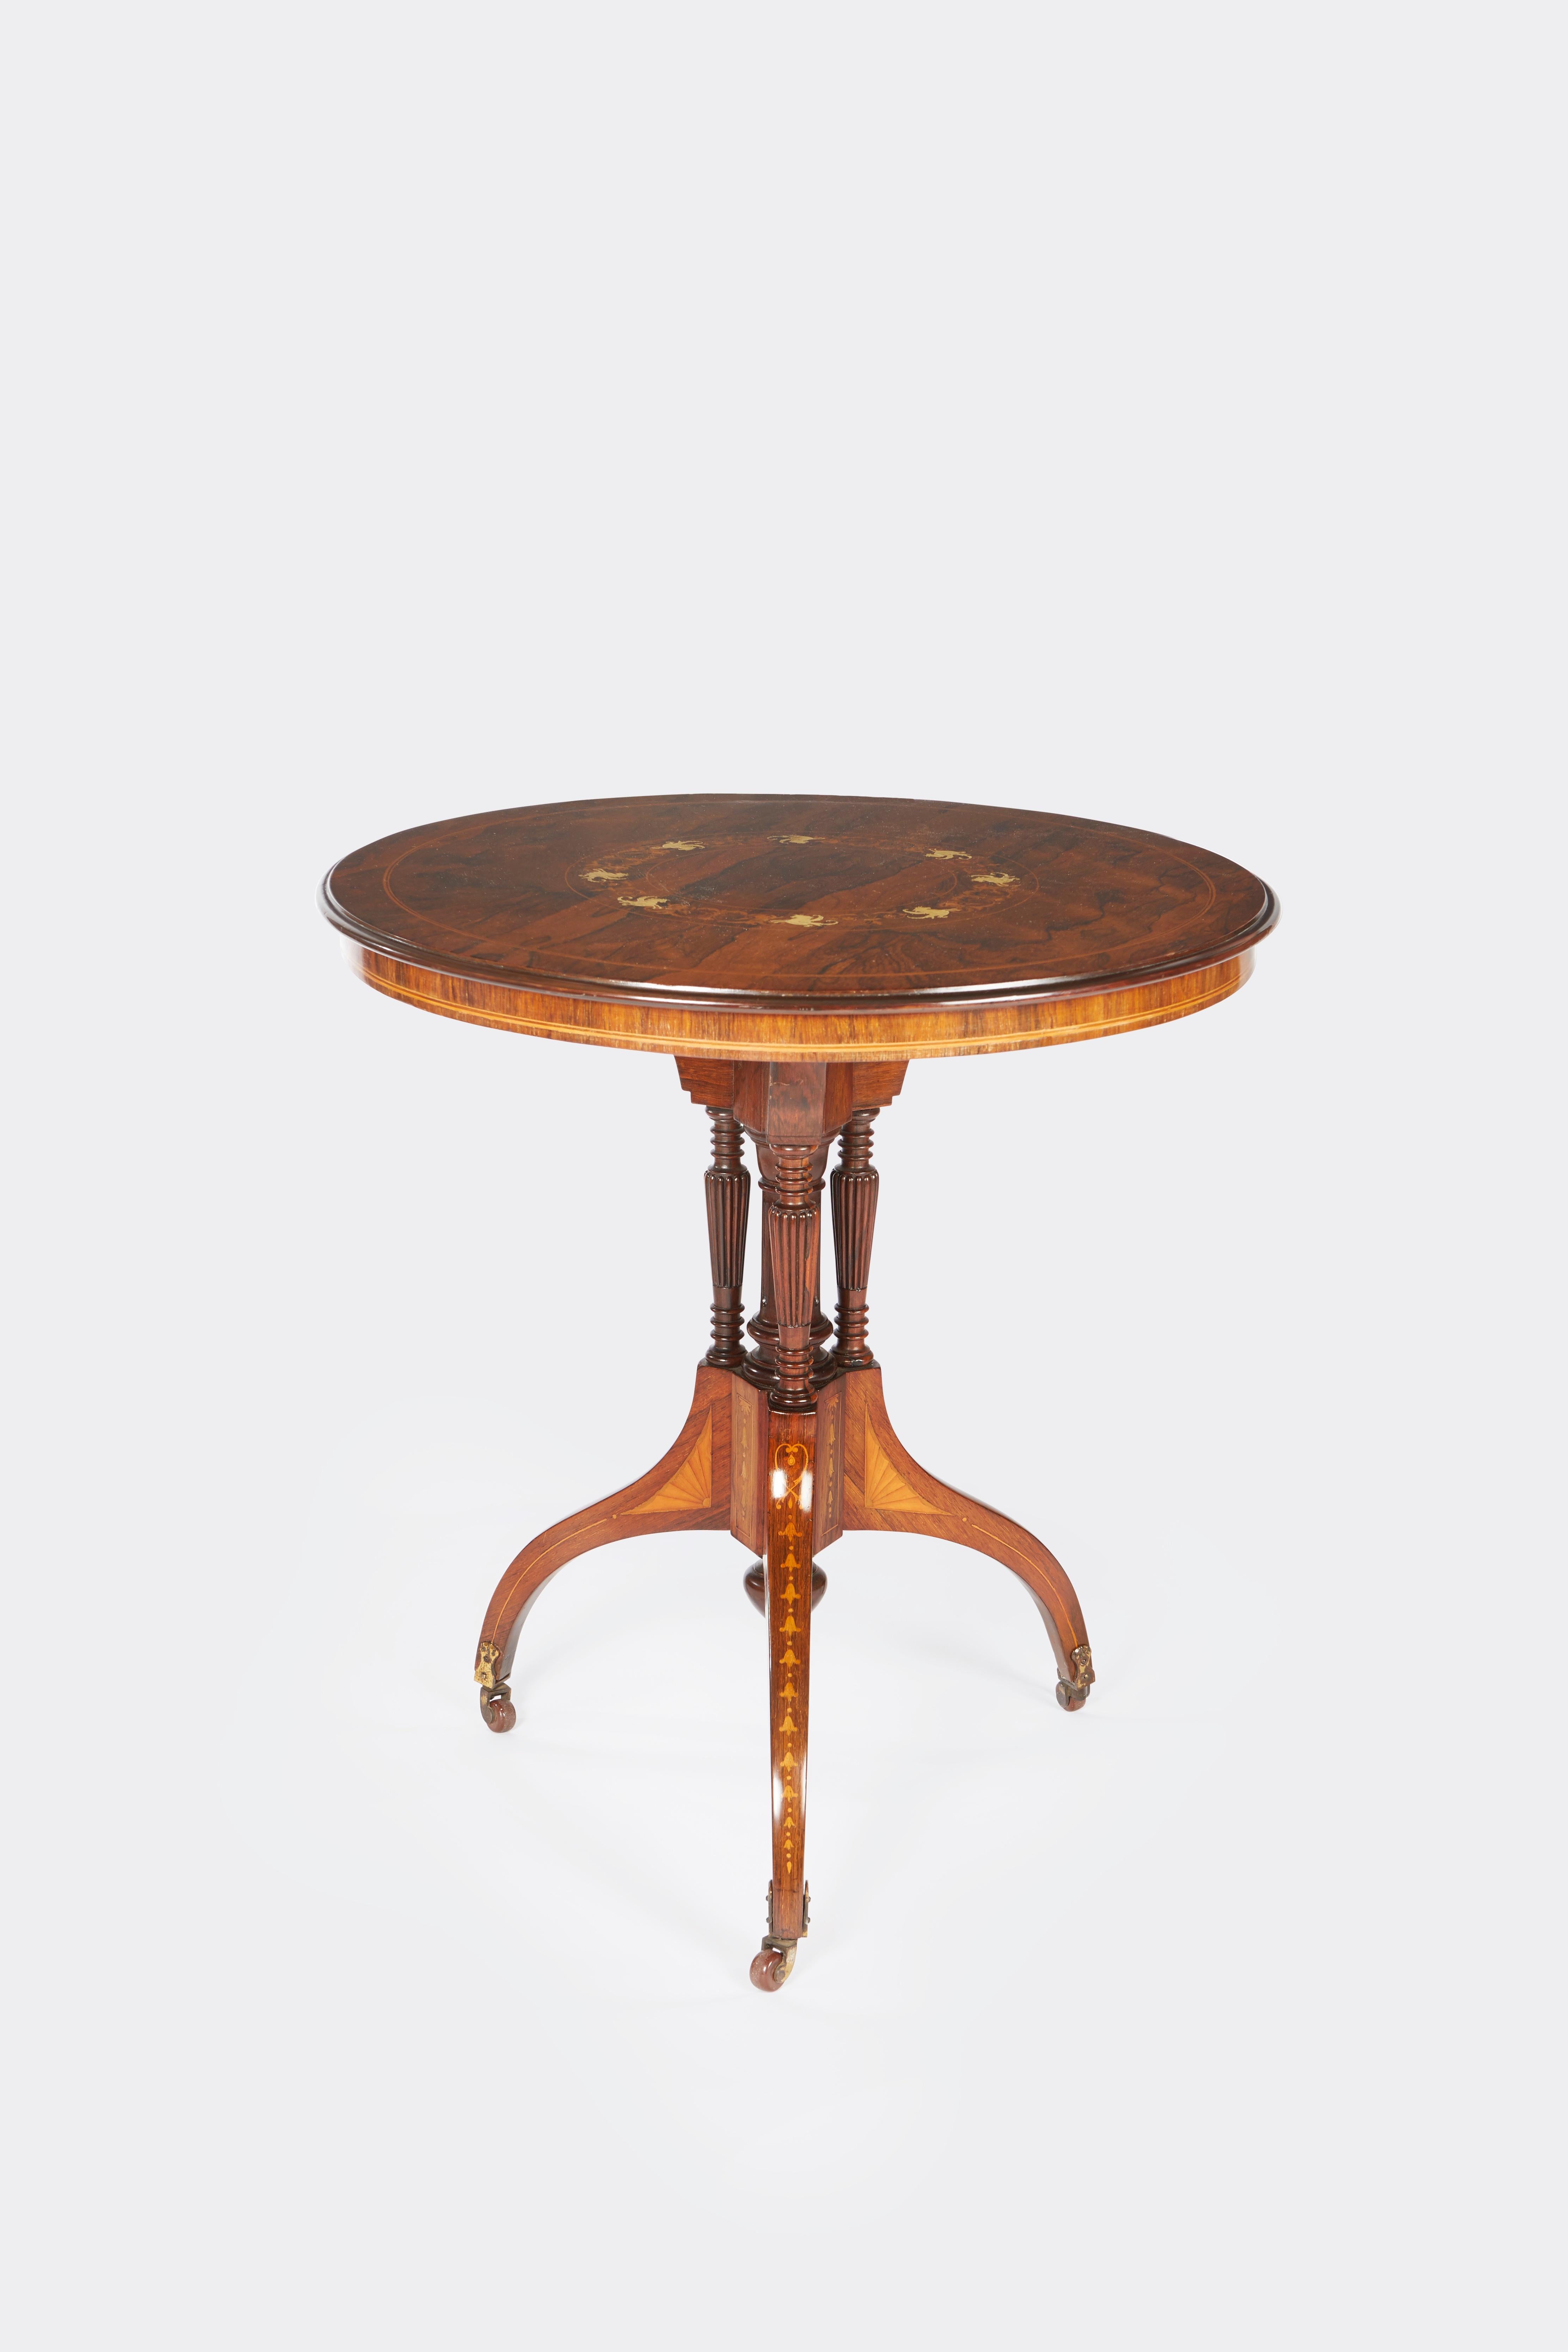 An American rosewood side table with a greek-inspired base the four legs with marquetry detail supported by baluster shaped elements. The highly figured rosewood veneered top having fine contrasting faux ivory inlay.